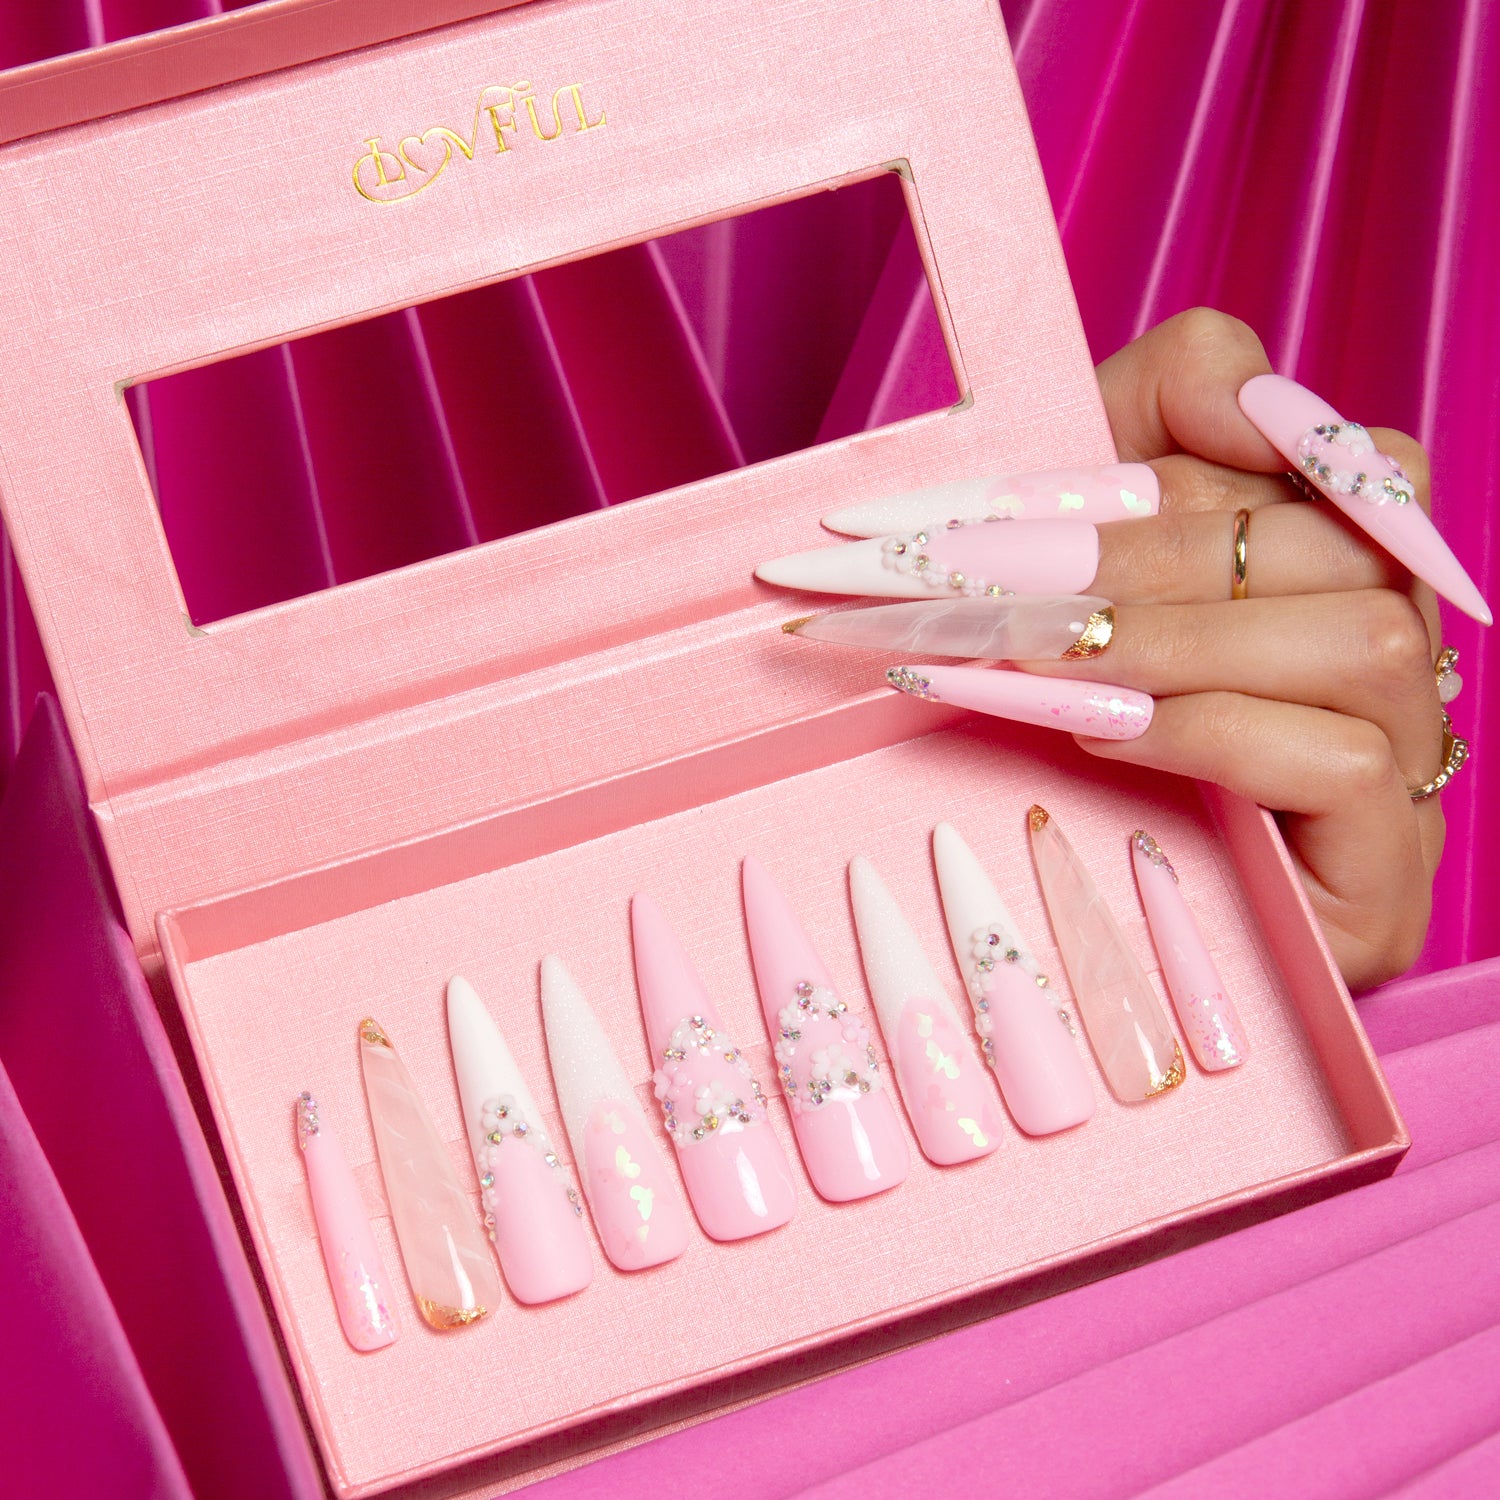 Lovful's Sweet Dream stiletto press-on nails in light pink with French tips and heart-shaped flower ring designs, ideal for weddings and bridal wear.